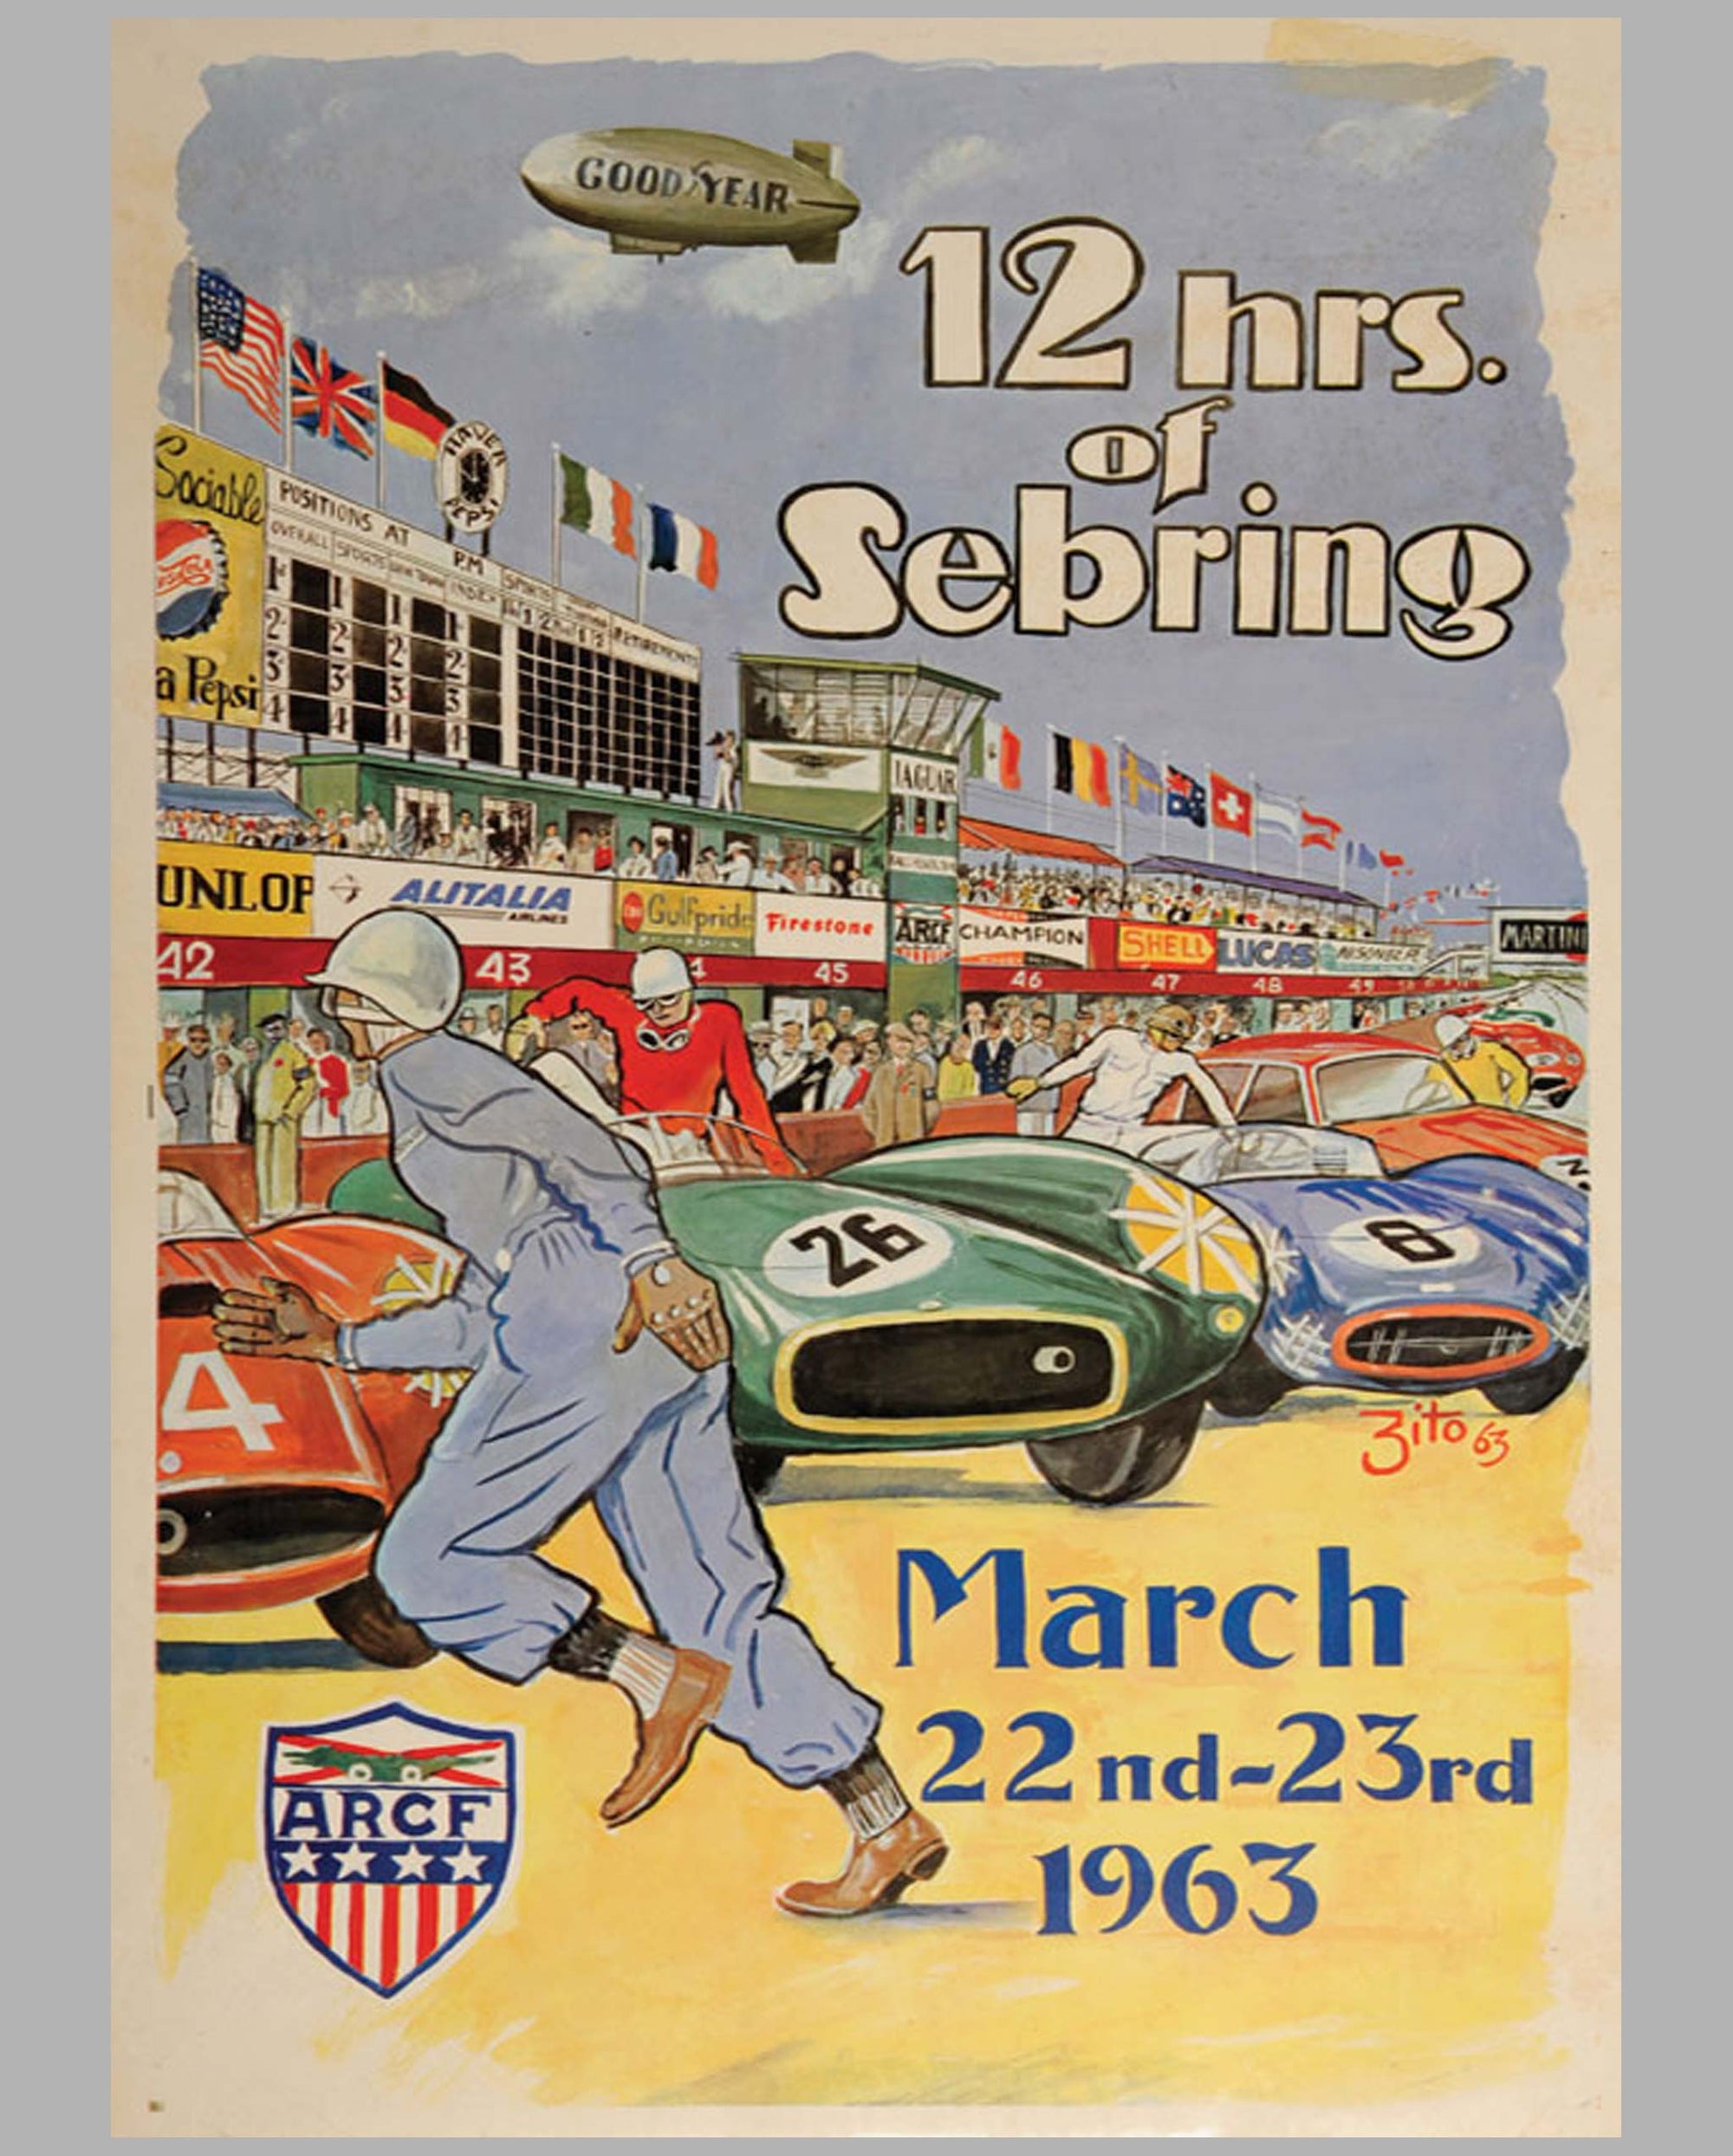 12 Hours of Sebring 1963 original event poster by Zito